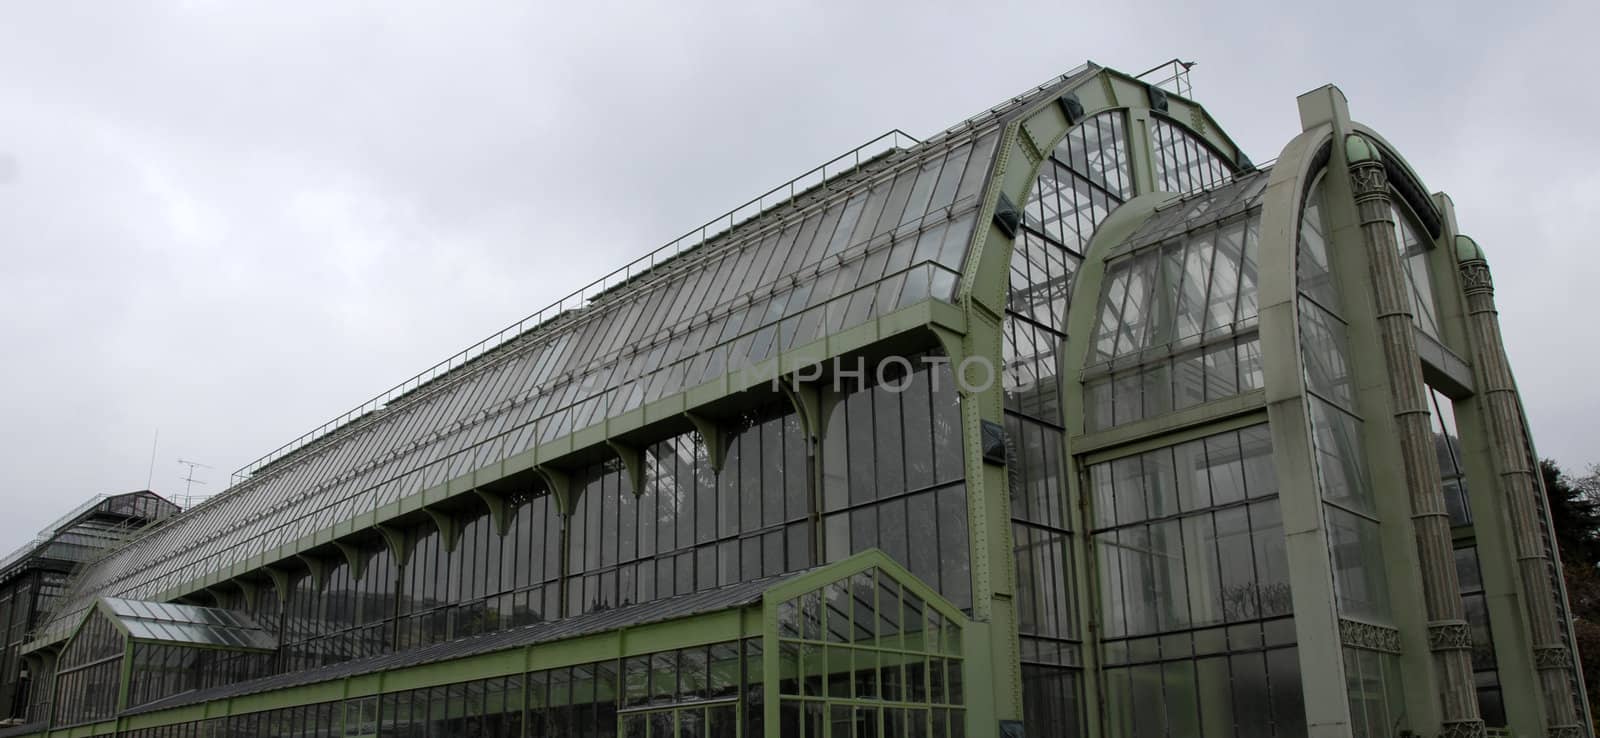 greenhouse of museum in Paris by cynoclub